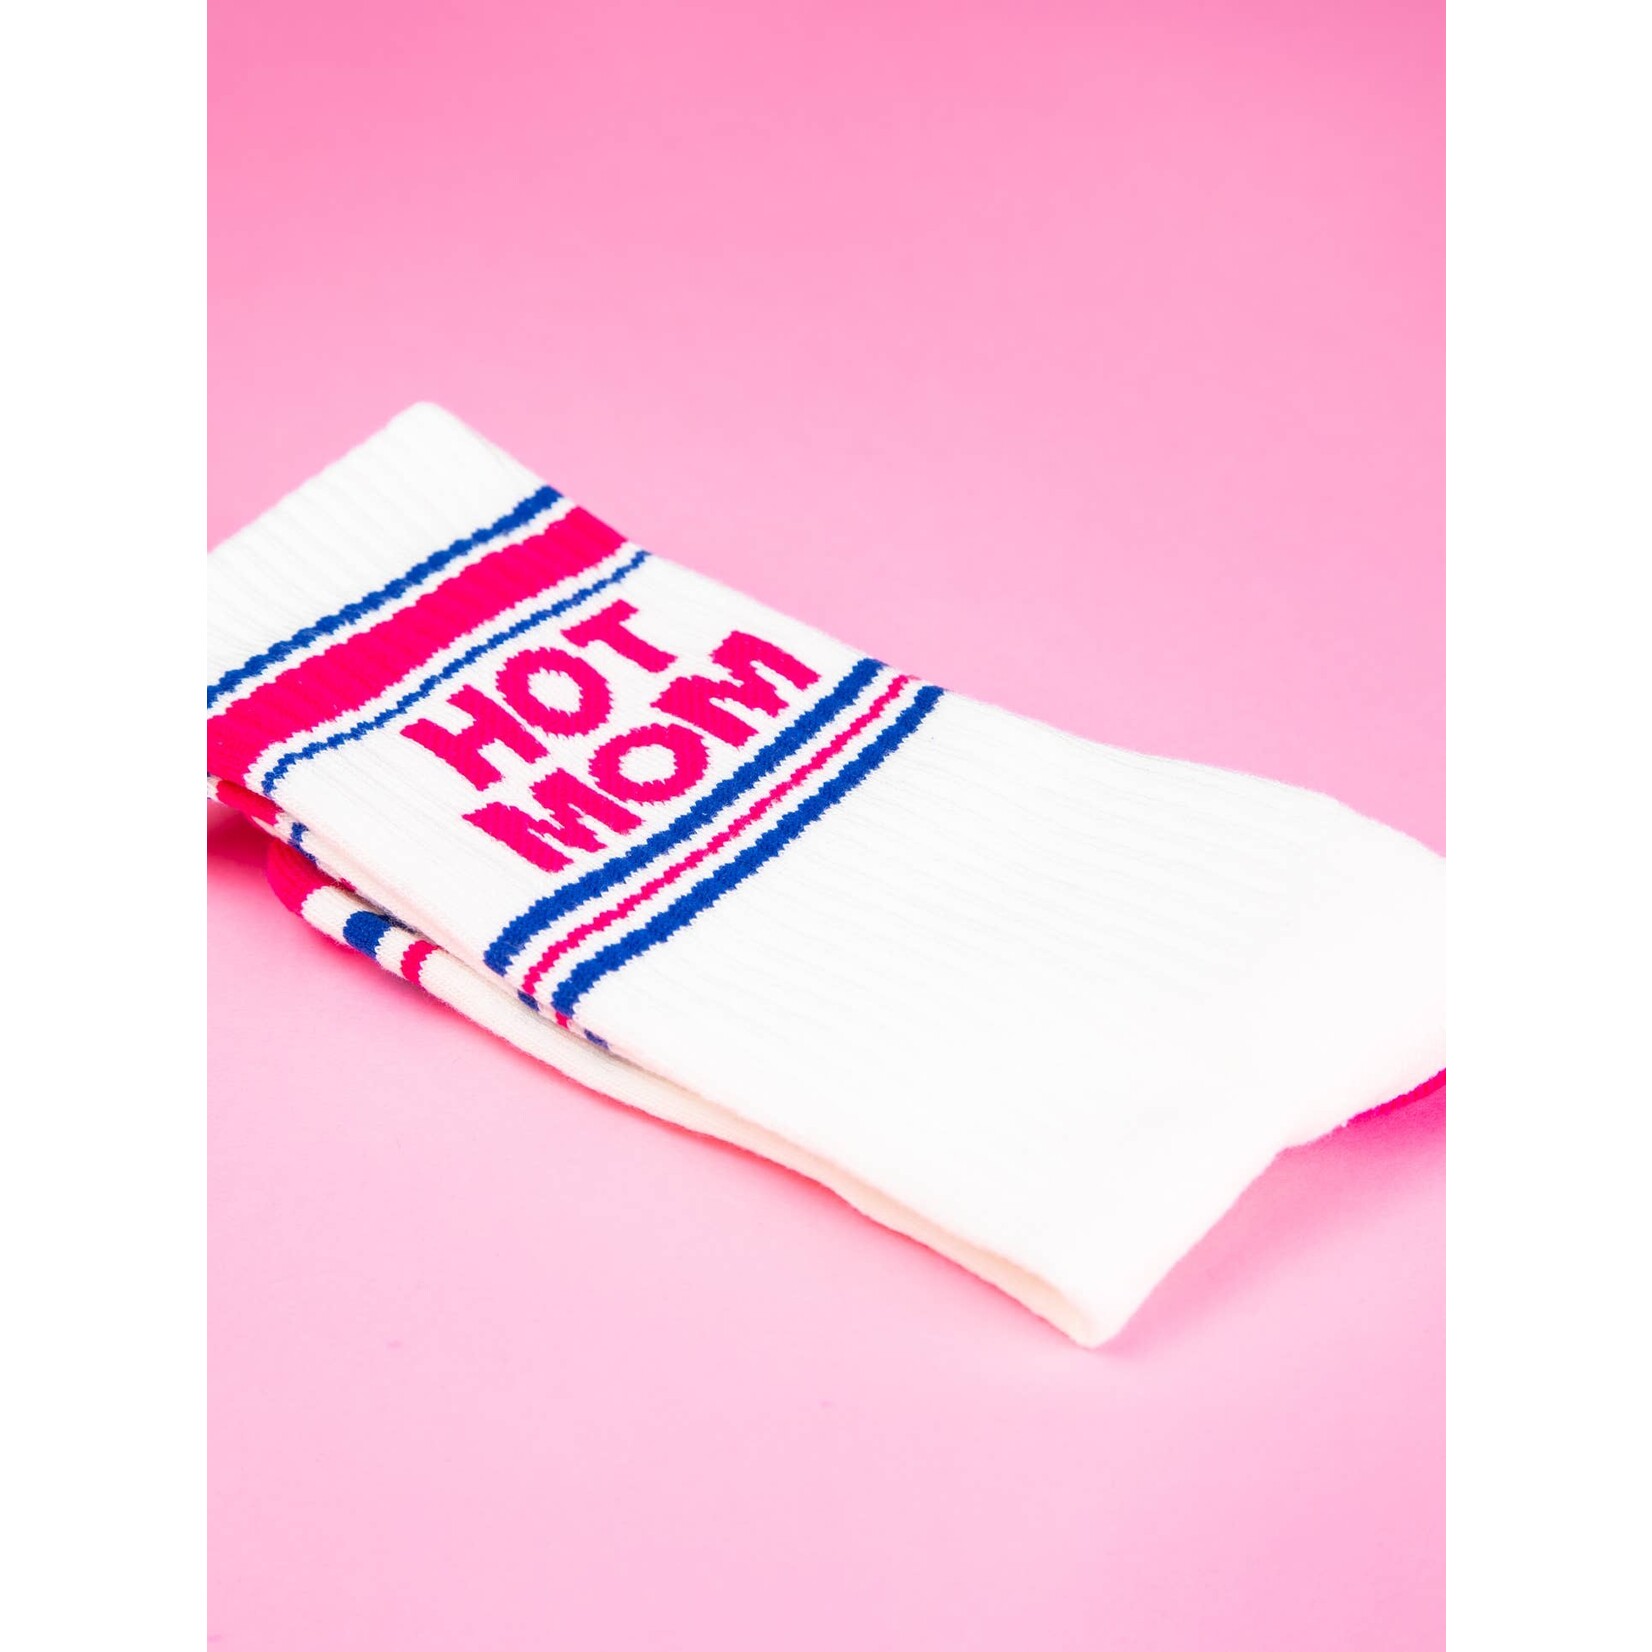 Gumball Poodle Hot Mom Gym Crew Socks